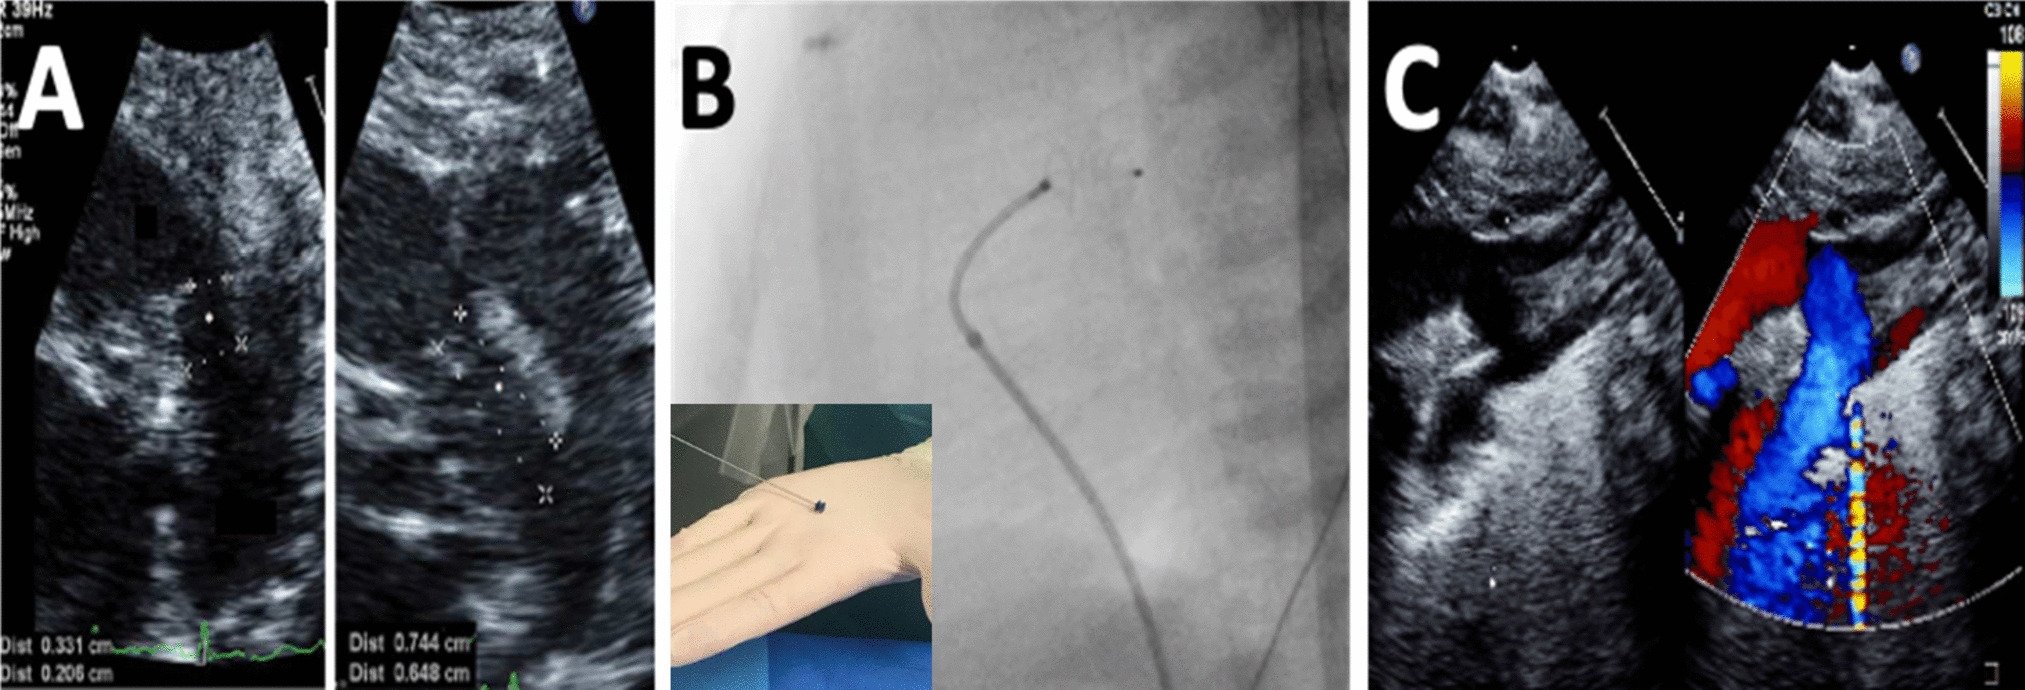 Post-ligation cardiac syndrome after surgical versus transcatheter closure of patent ductus arteriosus in low body weight premature infants: a multicenter retrospective cohort study